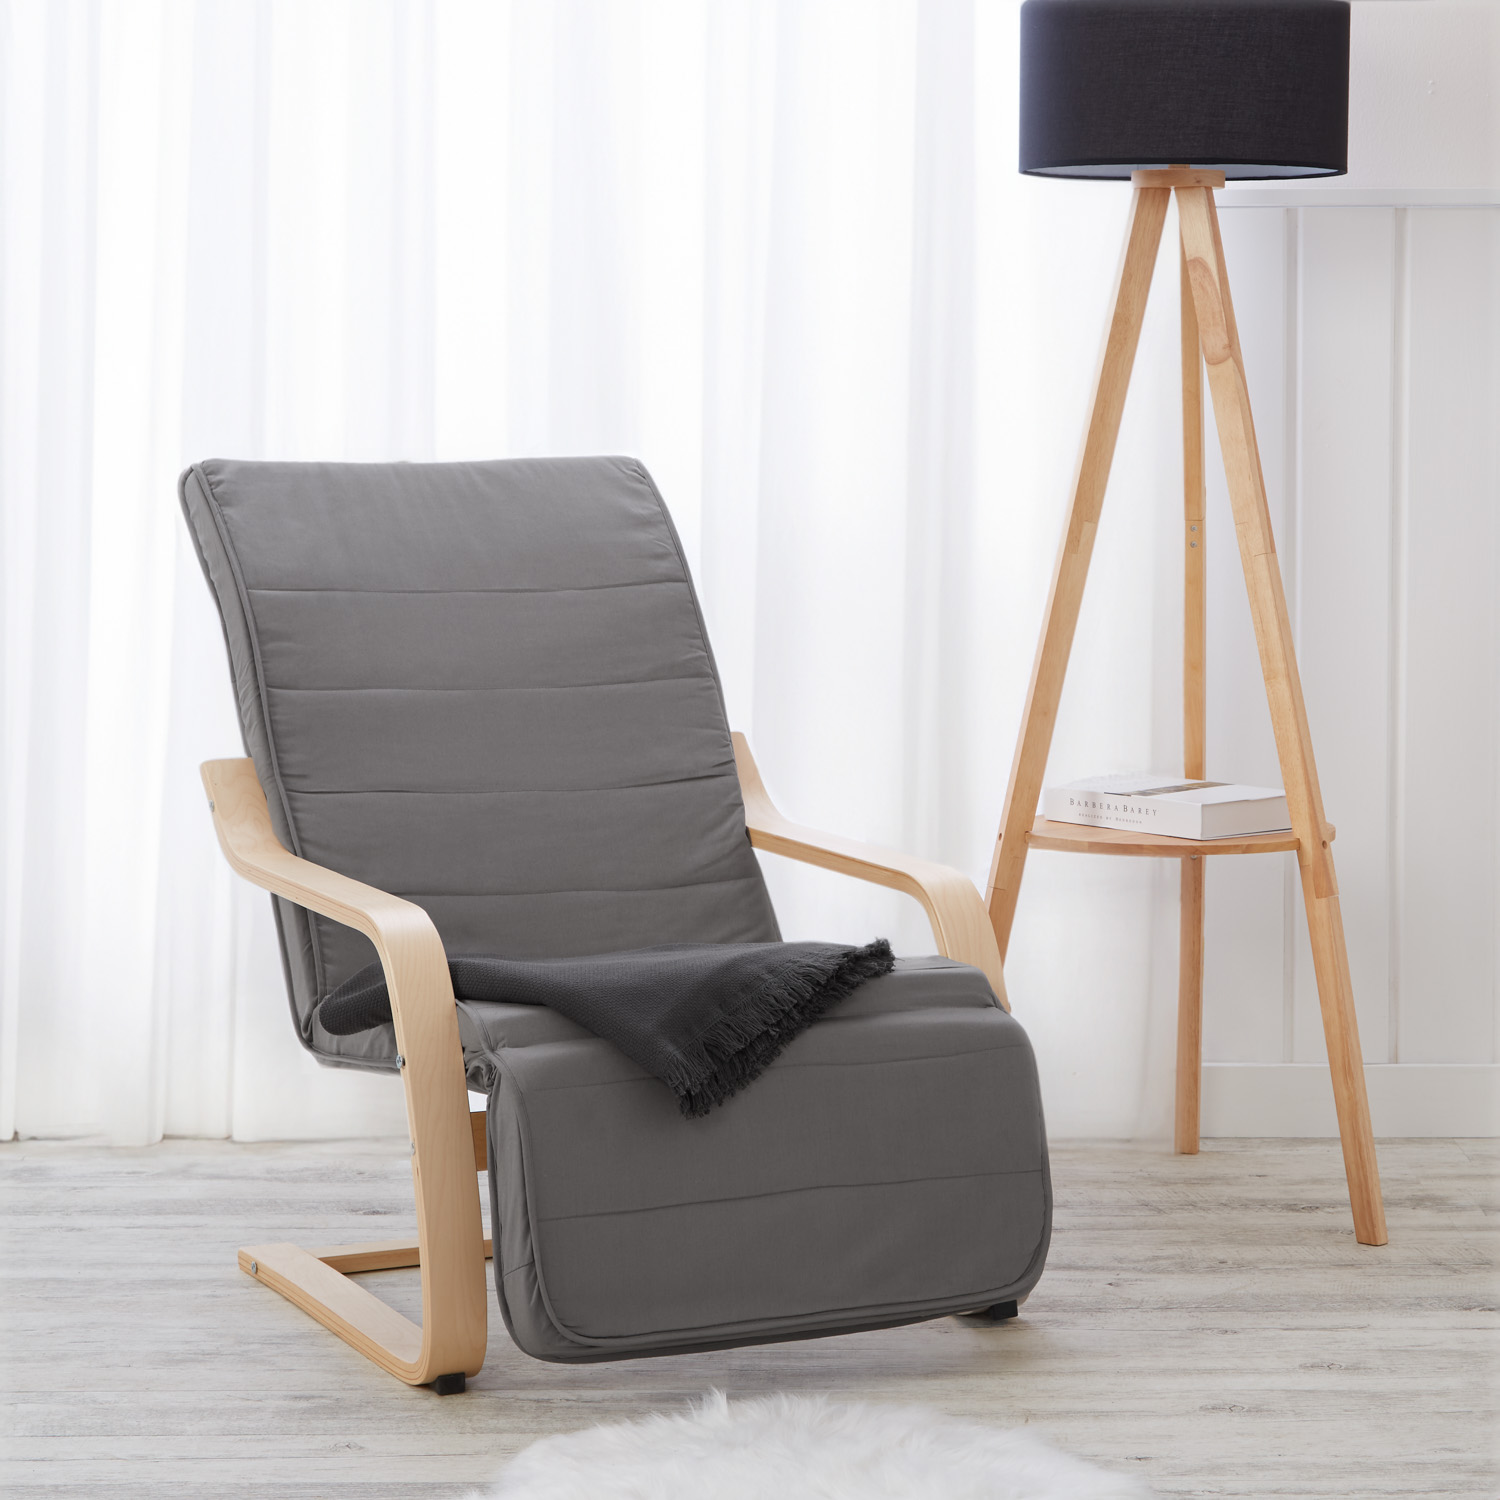 Recliner chair with footrest Grey Nursing chair Chaise lounge Eames chair Armchair